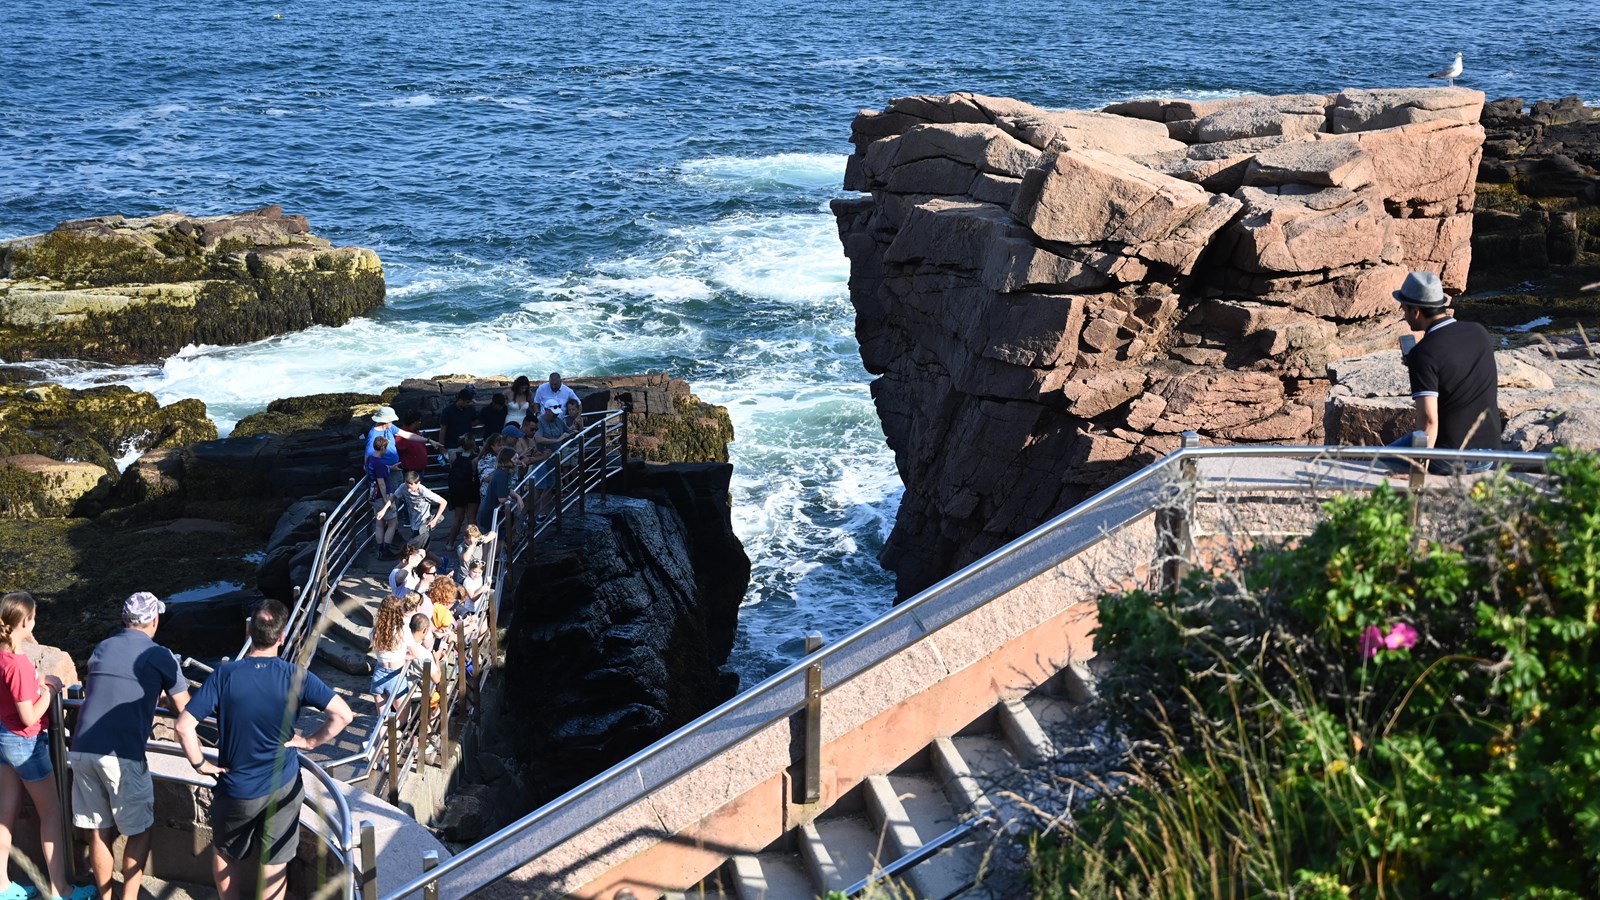 A large rock formation protrudes on the right side, with a set of stairs toward waters edge.